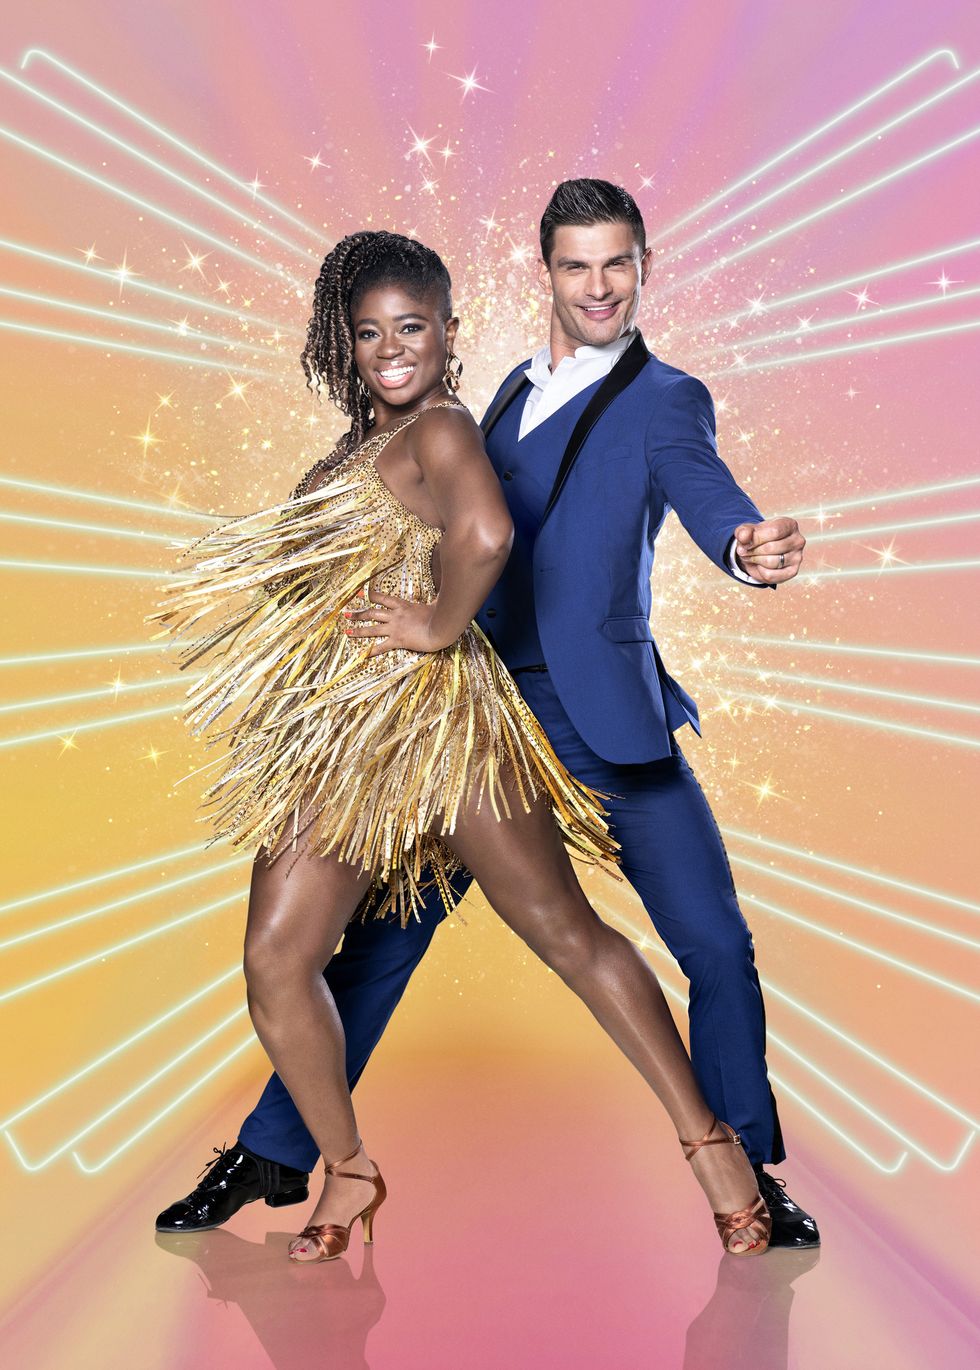 strictly come dancing 2020 couples   clara amfo, in a gold sequinned dress, and aljaz skorjanec, in a blue suit, standing against a pink and orange background